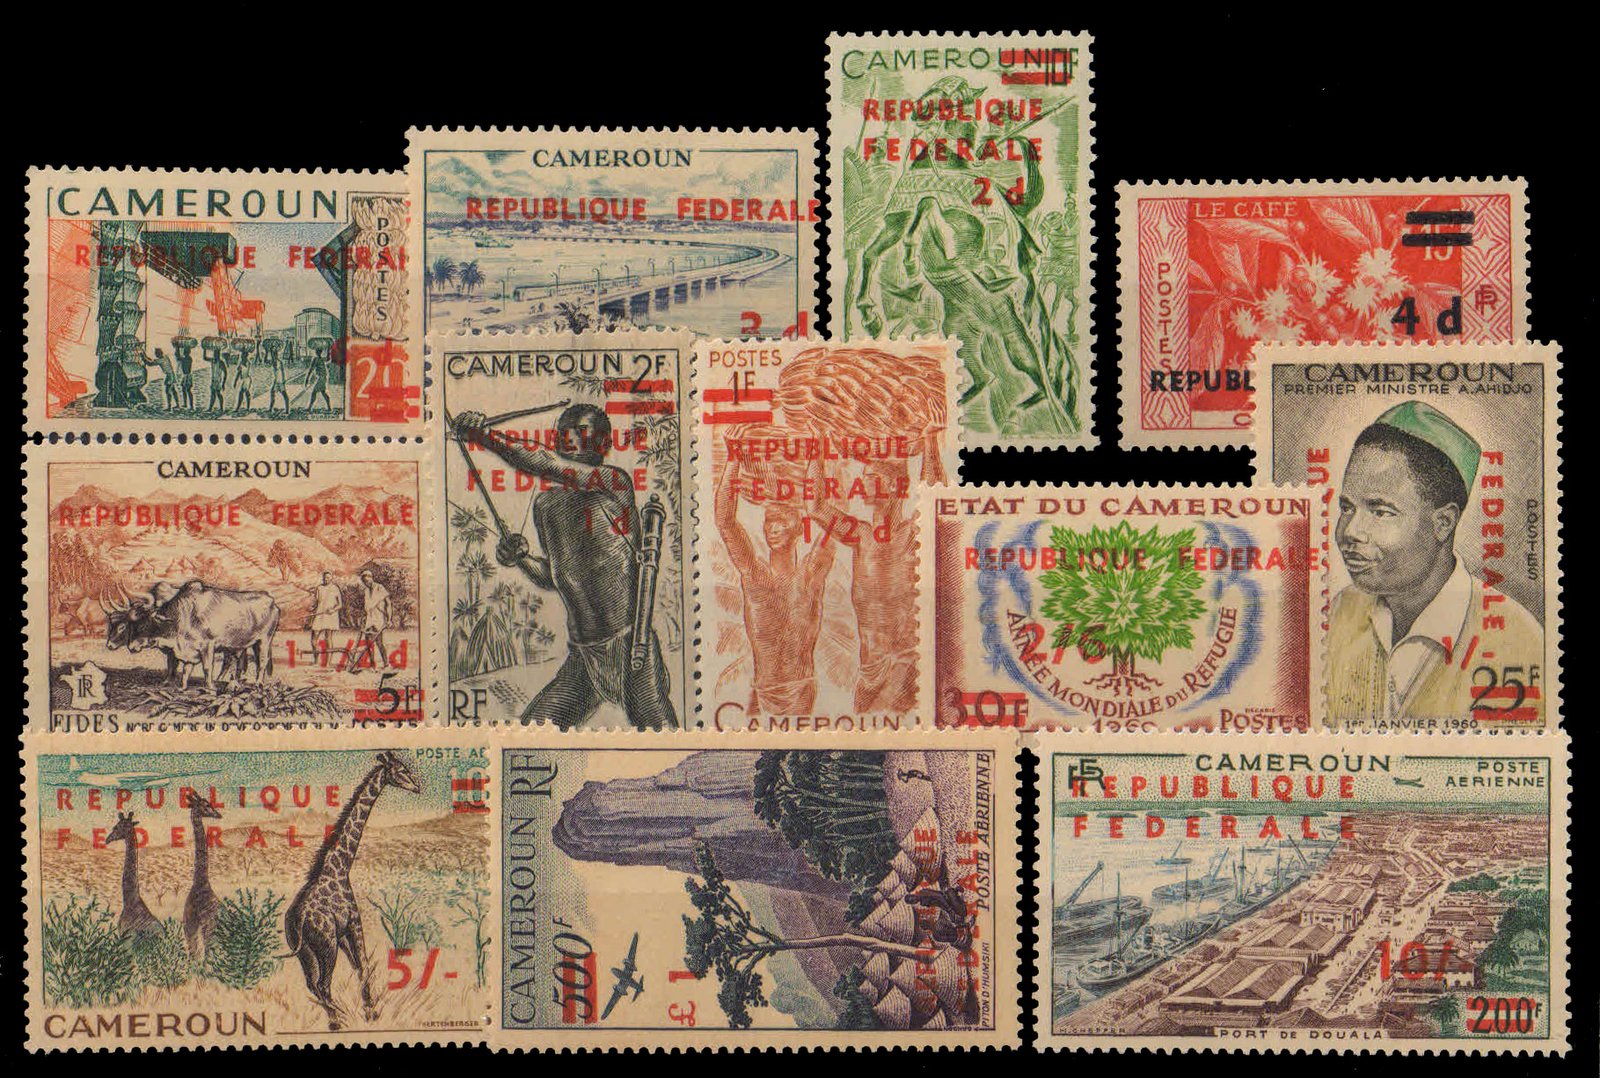 CAMEROUN 1961-Surcharged Thematic Issues-Complete Set of 12 Stamps-MNH, Cat � 80-S.G. 286-297a